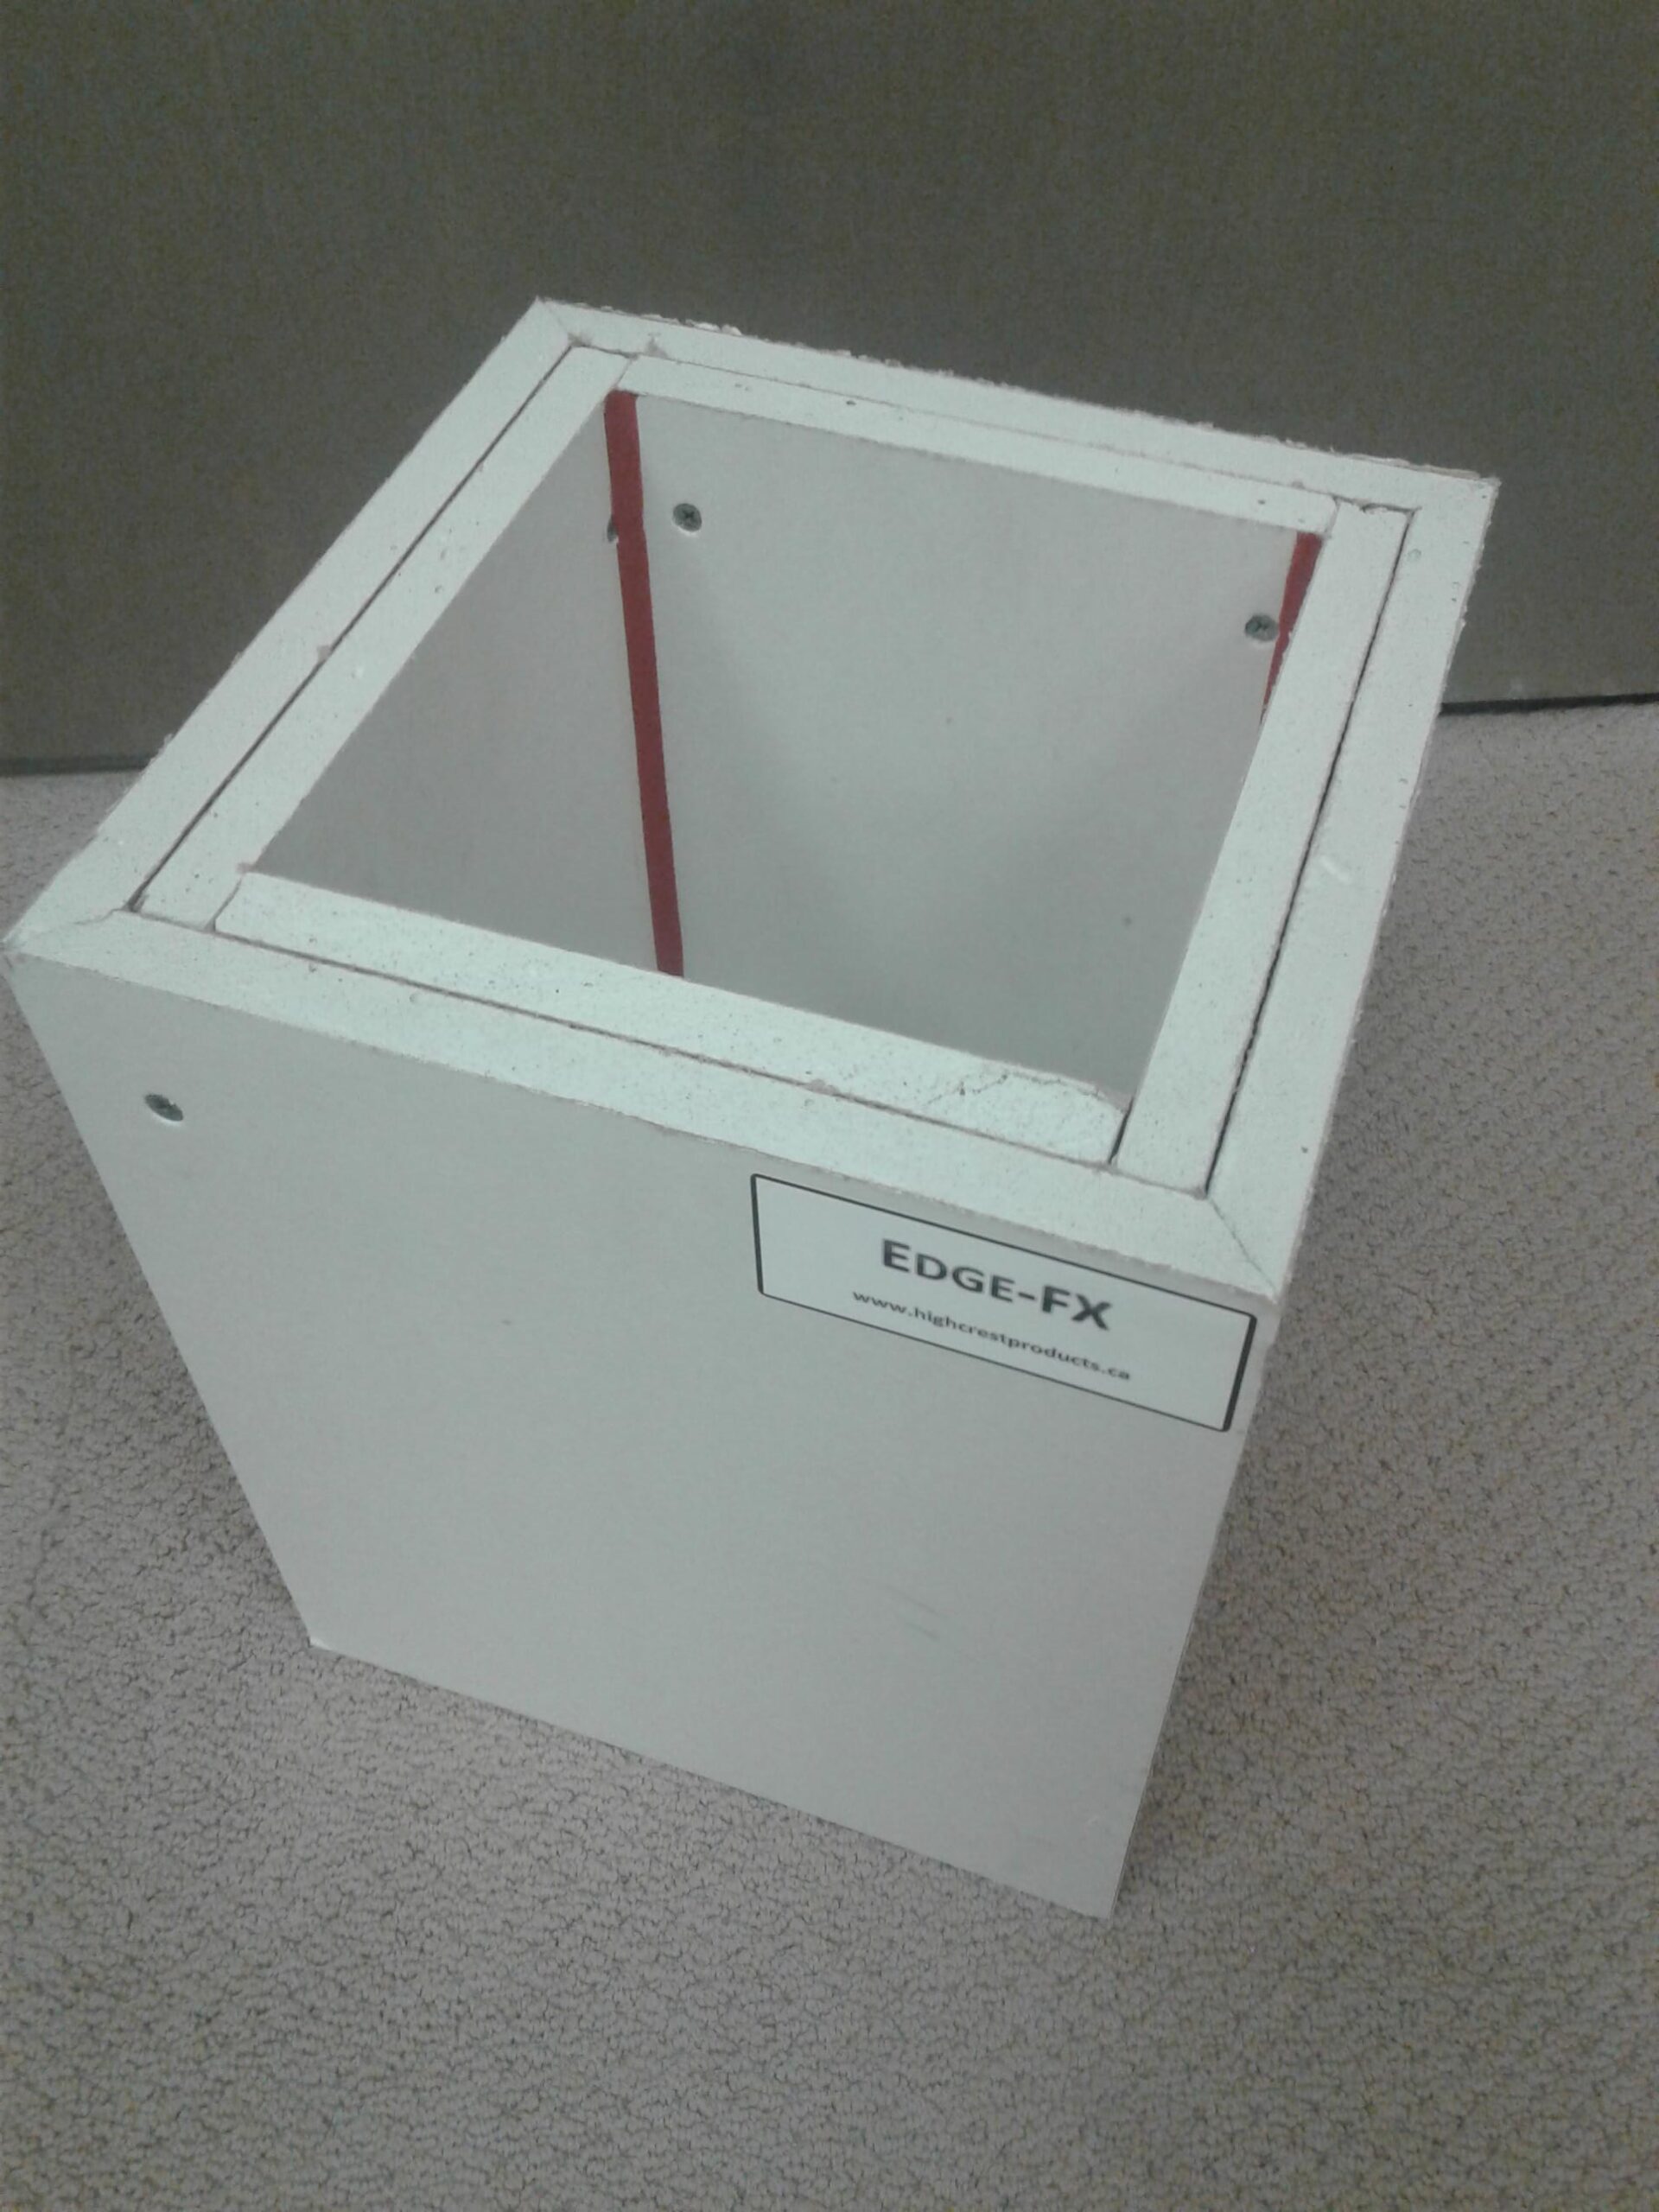 Edge-FX Gypsum Boxes for Acoustic & Fire Rated Applications